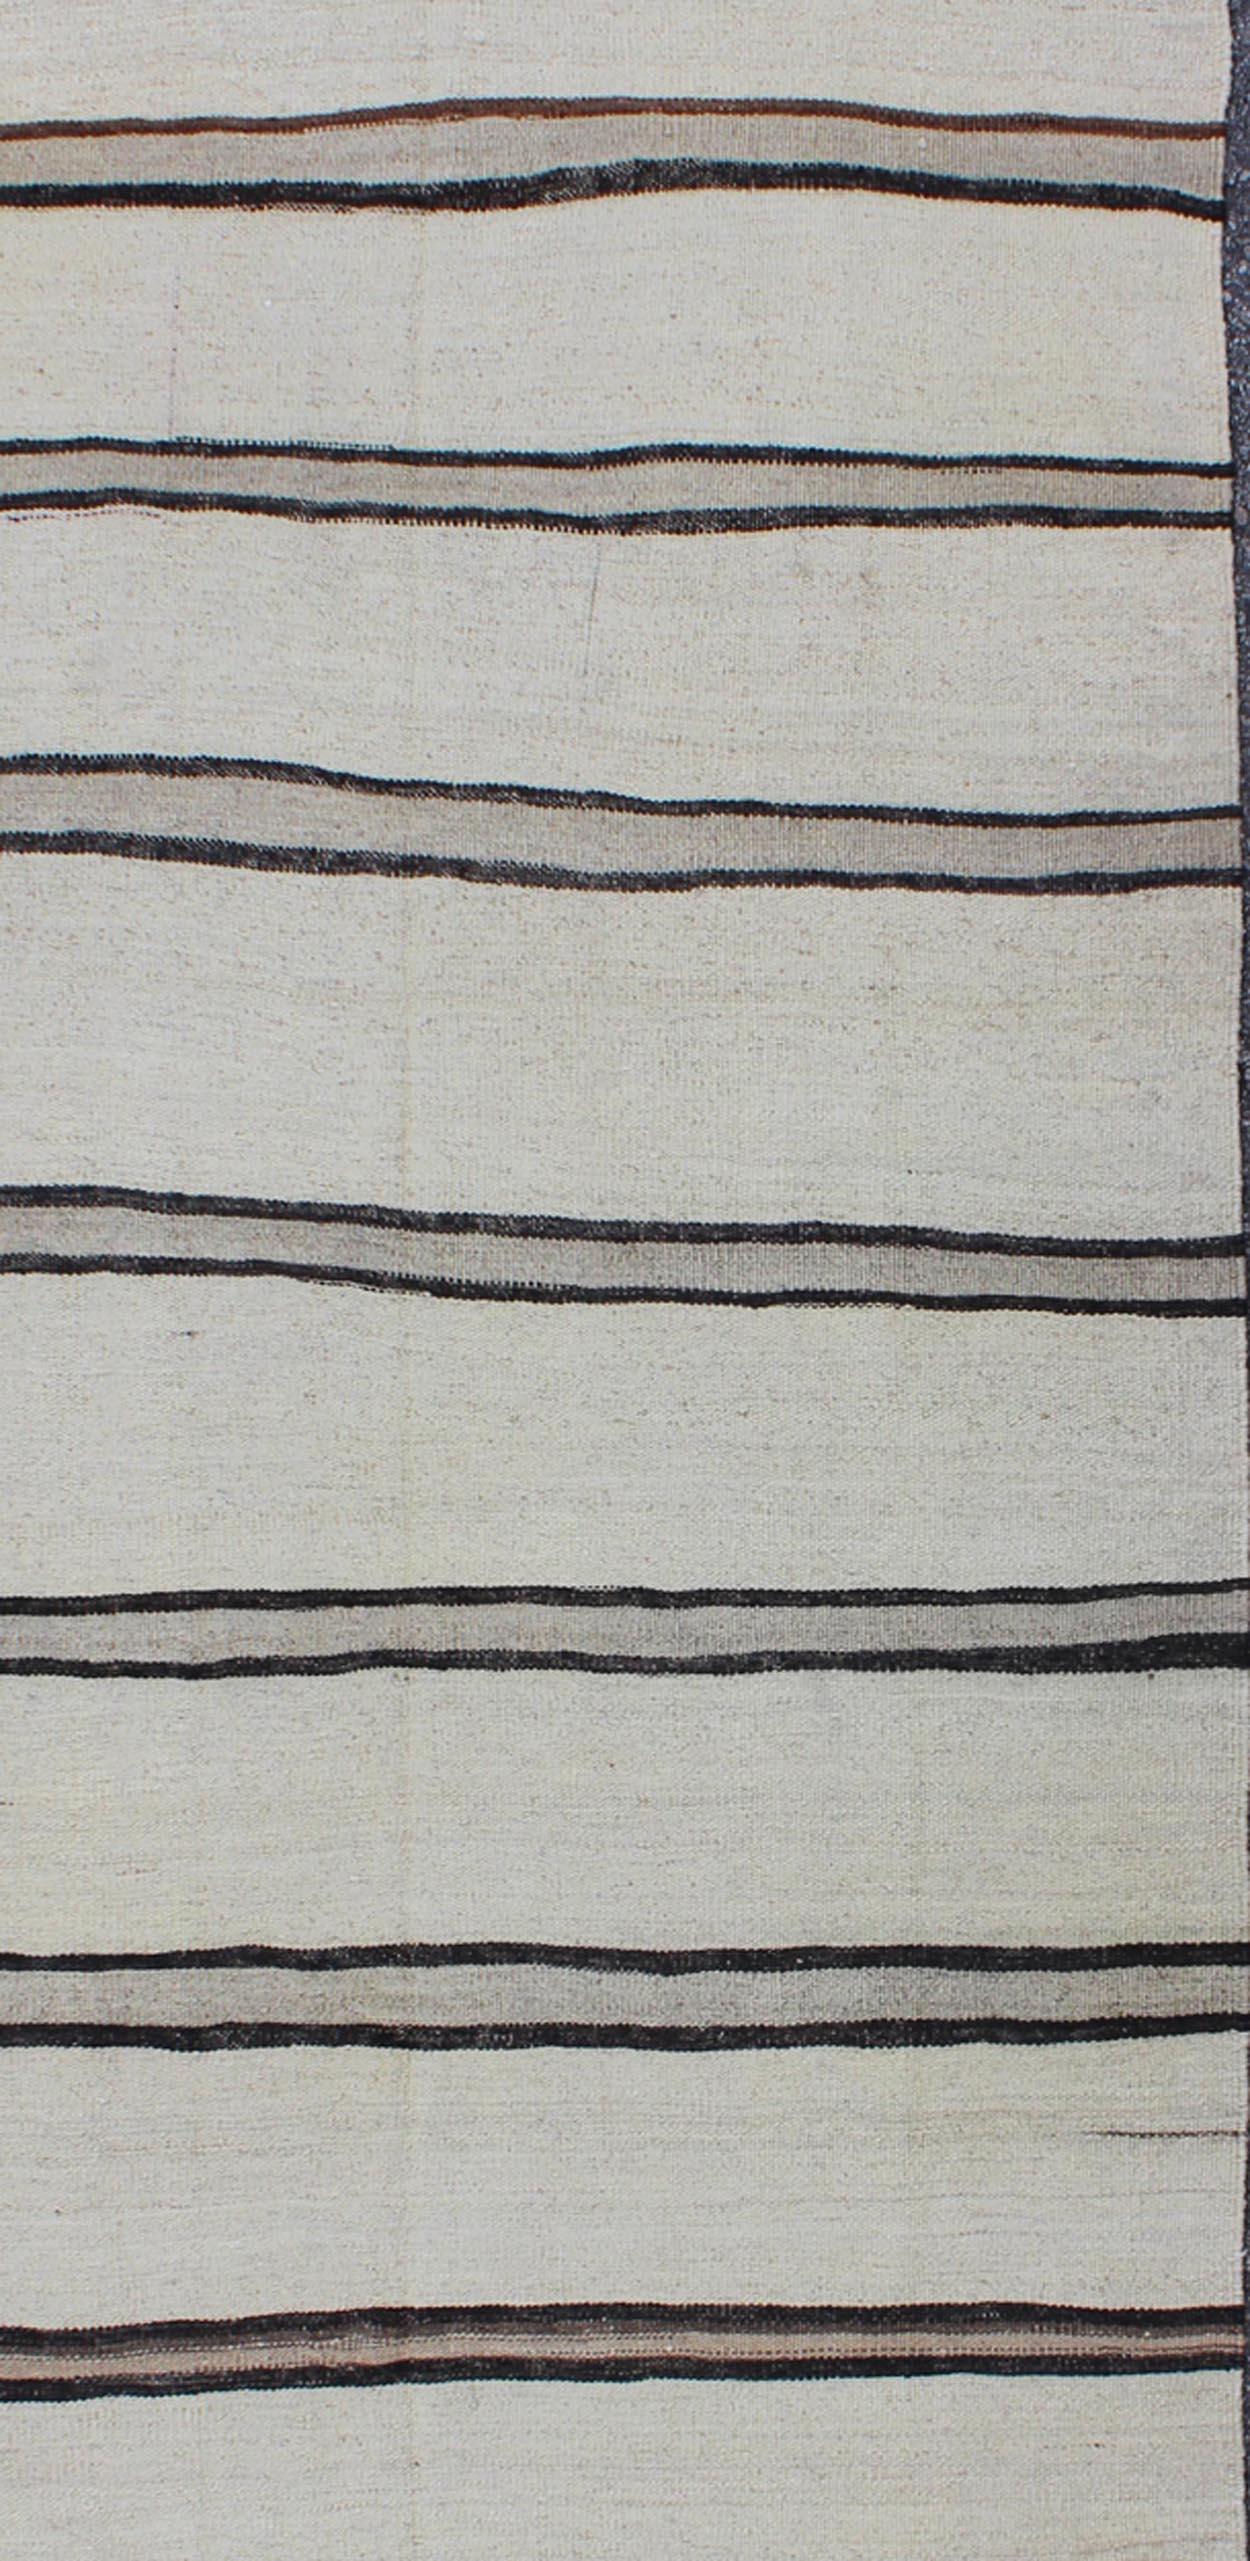 Minimalist design with traces of stripes Kilim runner in cream, light brown and taupe, rug EN-165689, country of origin / type: Turkey / Kilim, circa 1950

This flat-woven Kilim runner from Turkey features an understated composition consisting of